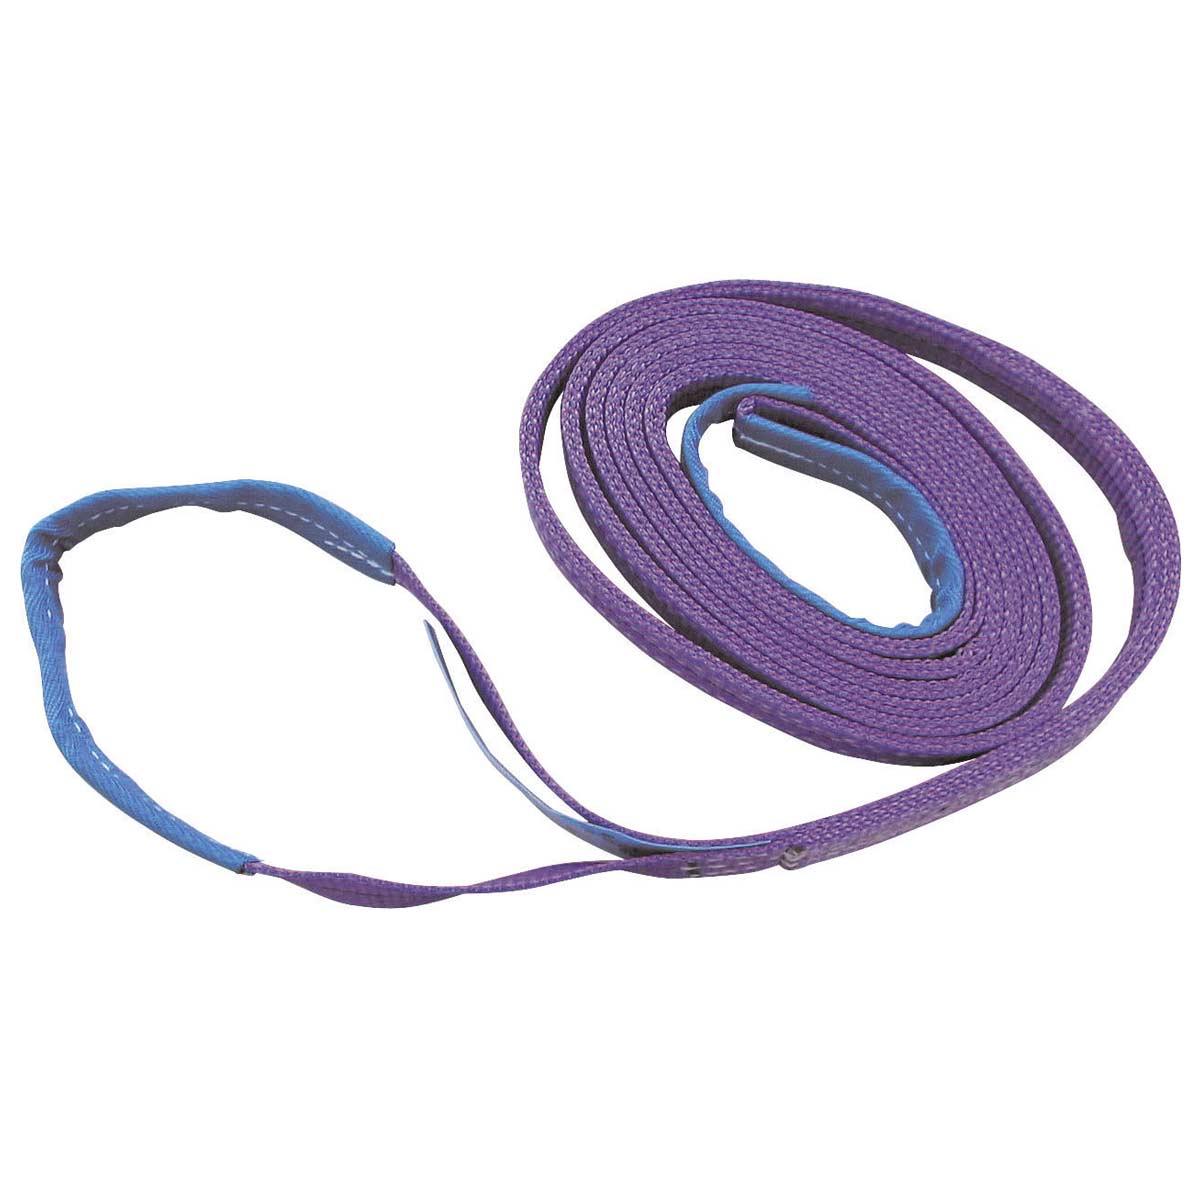 Lifting belt double-layer